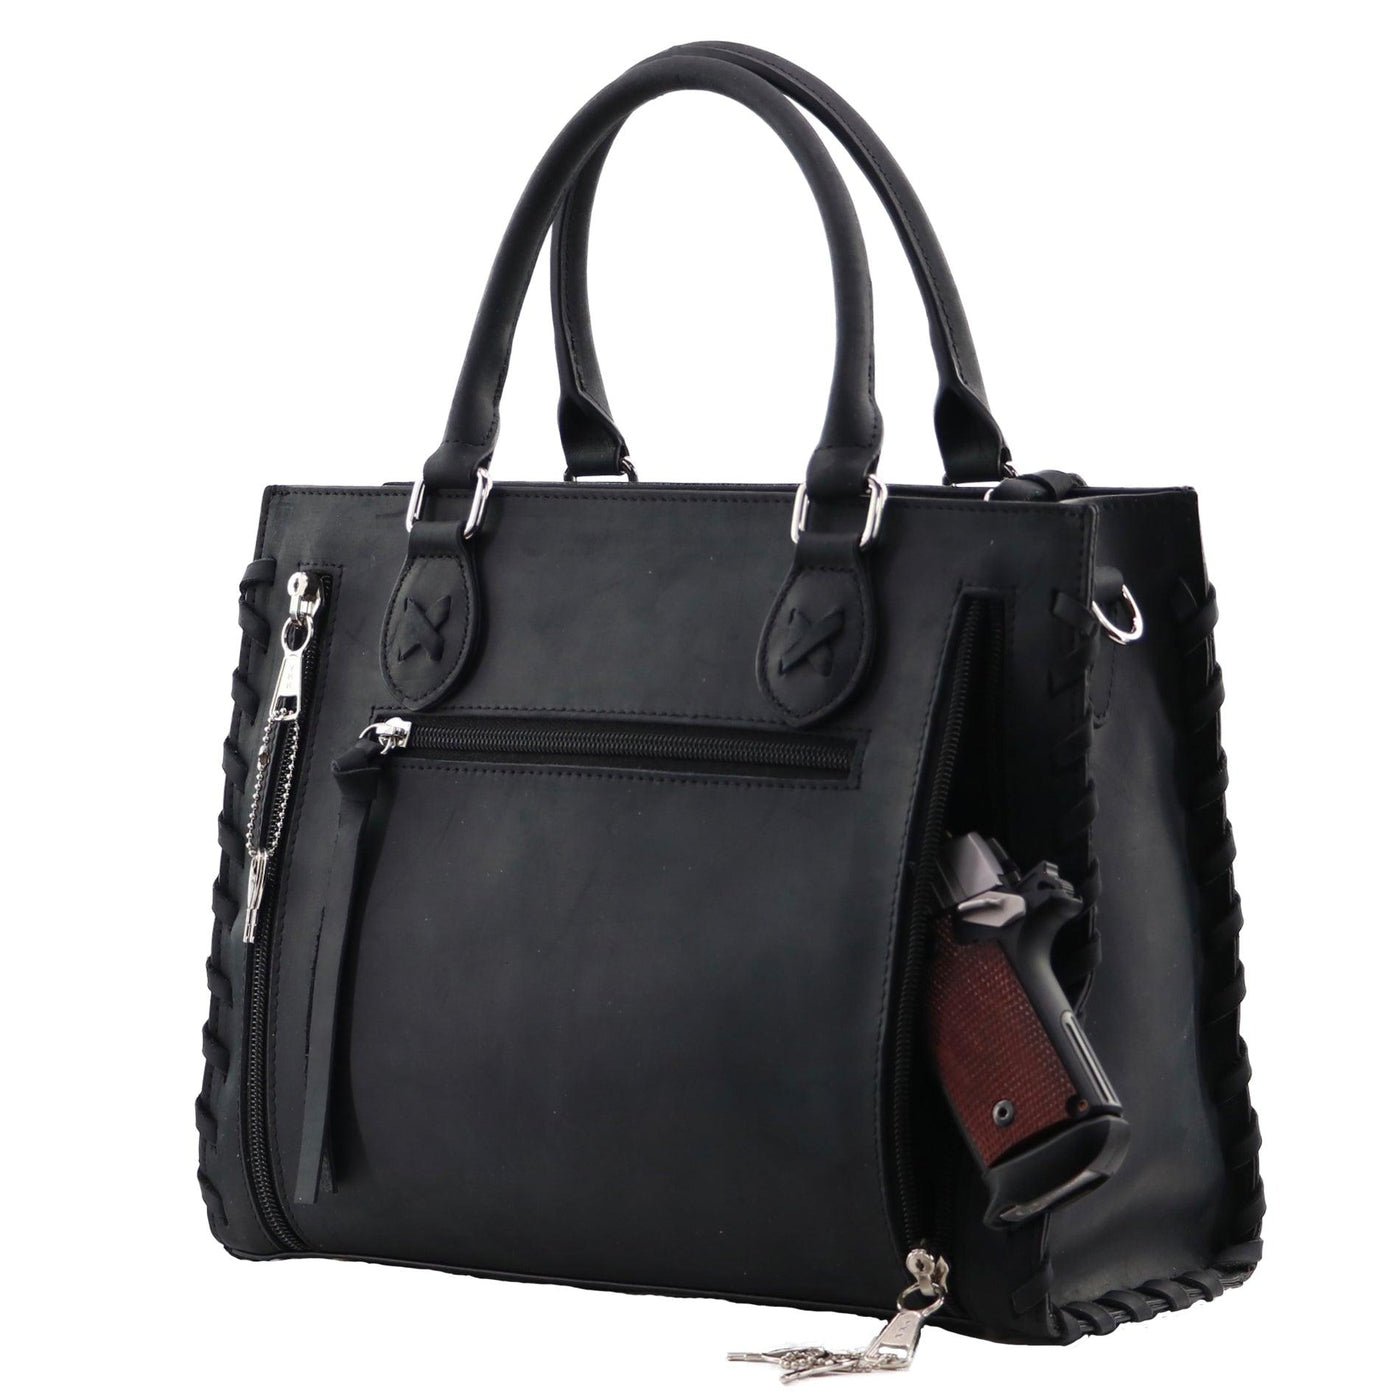 Concealed Carry Emma Leather Satchel -  Designer Concealed Carry Purse -  YKK Locking Purse with Universal Holster -  Leather Bag For Gun Owners - Easy Conceal Carry -  CCW Purse for Women -  concealed carry Handbag for woman -  Conceal and Carry purse for Handgun -   Designer Luxury Conceal Carry Handbag -  Unique Hide Handbag Gun and Pistol Bag -  carry Handbag for concealed gun carry -  Unique Emma gun Handbag 